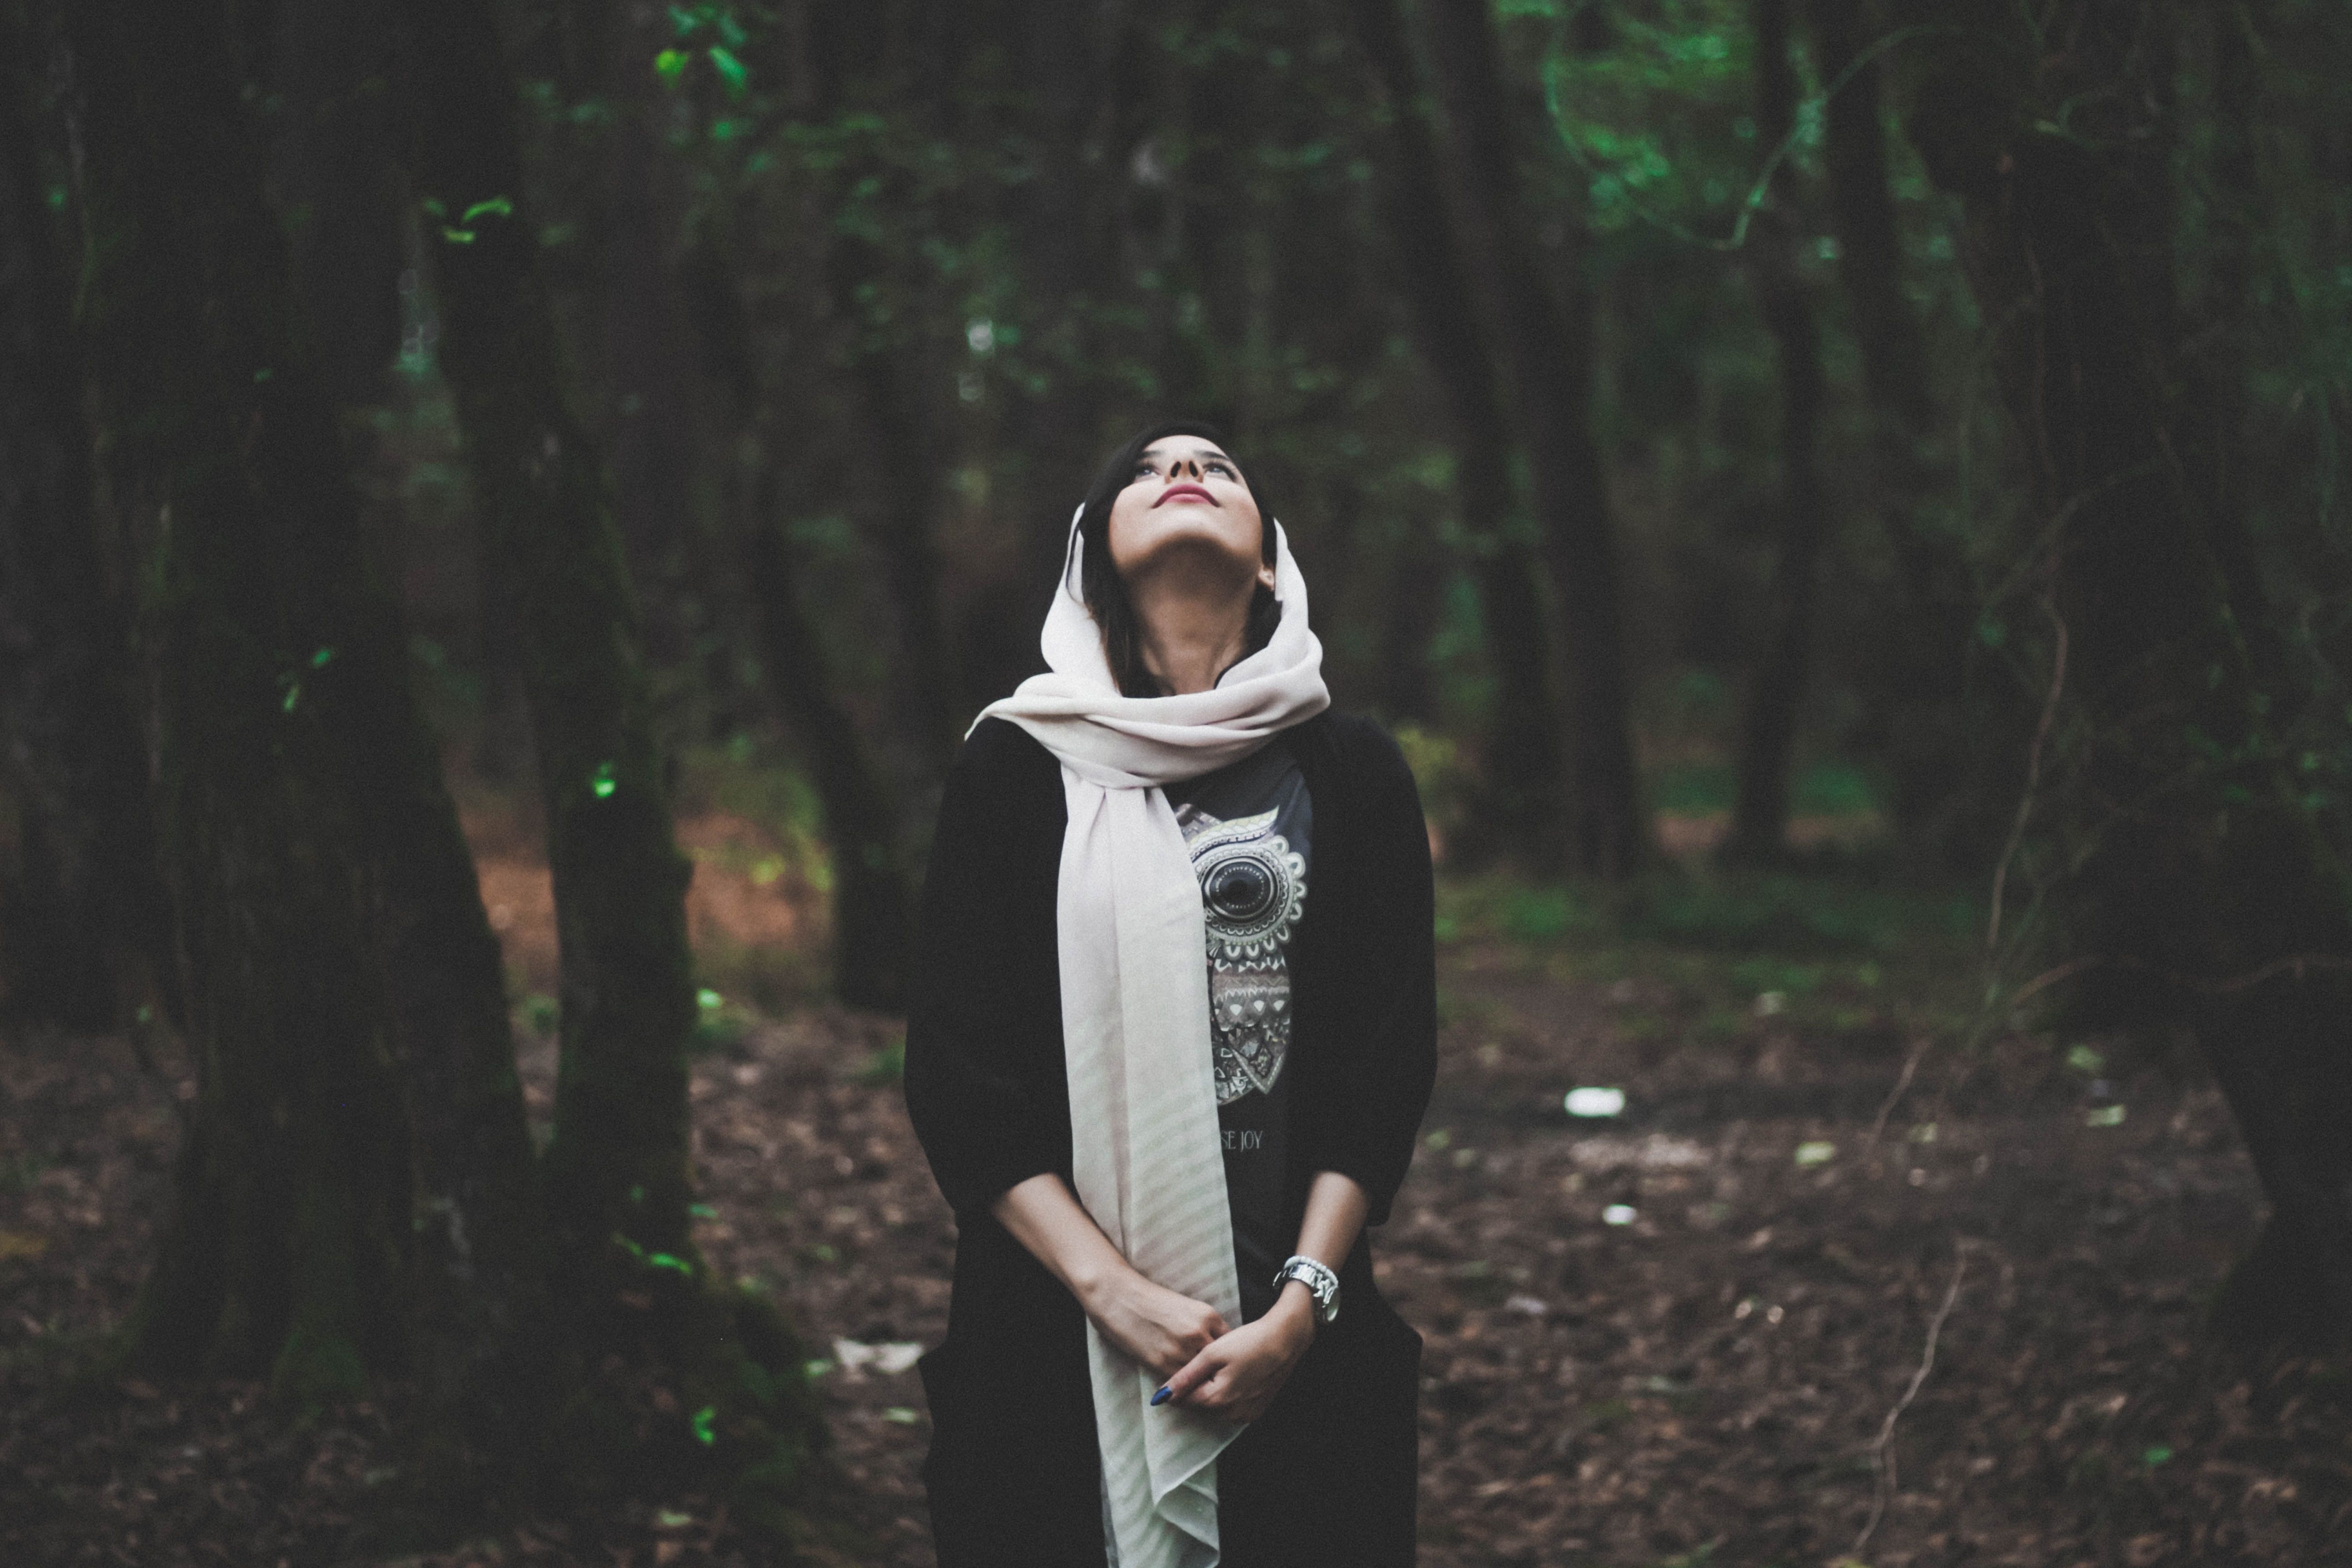 5184x3456 #evening, #nature, #tree, #staring, #waiting, #lady, #fashion, #girl, #scarf, #foggy, #jungle, #portrait, #moody, #woman, #green, #wondering, #looking, #Free image, #forest, #dark, #afternoon. Mocah.org HD Desktop Wallpaper